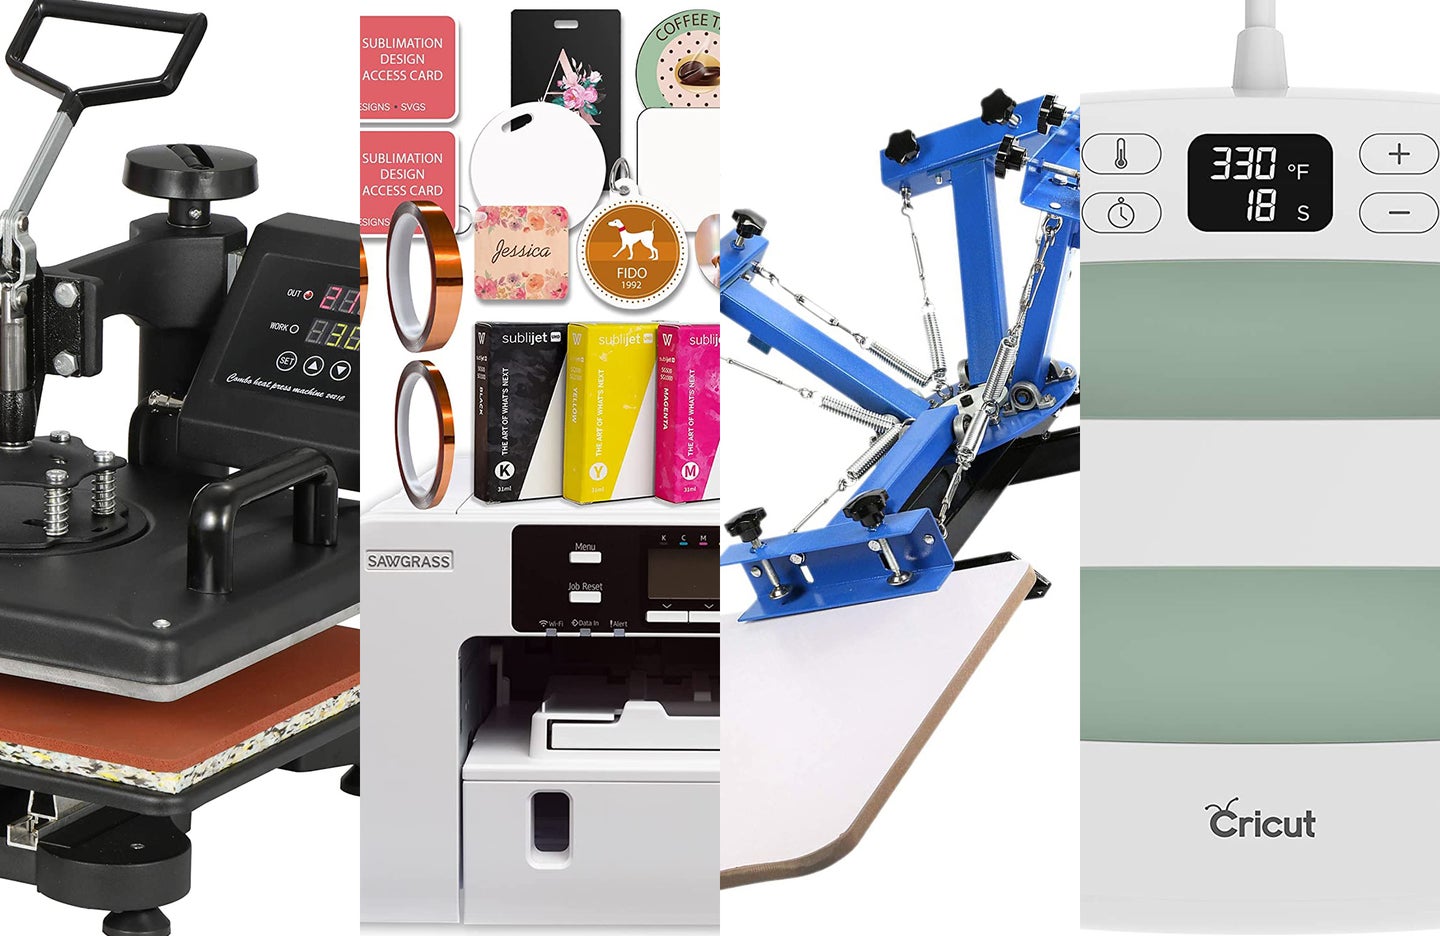 Image showing a heat press, sublimation printer, screen printing machine, and budget heat press.